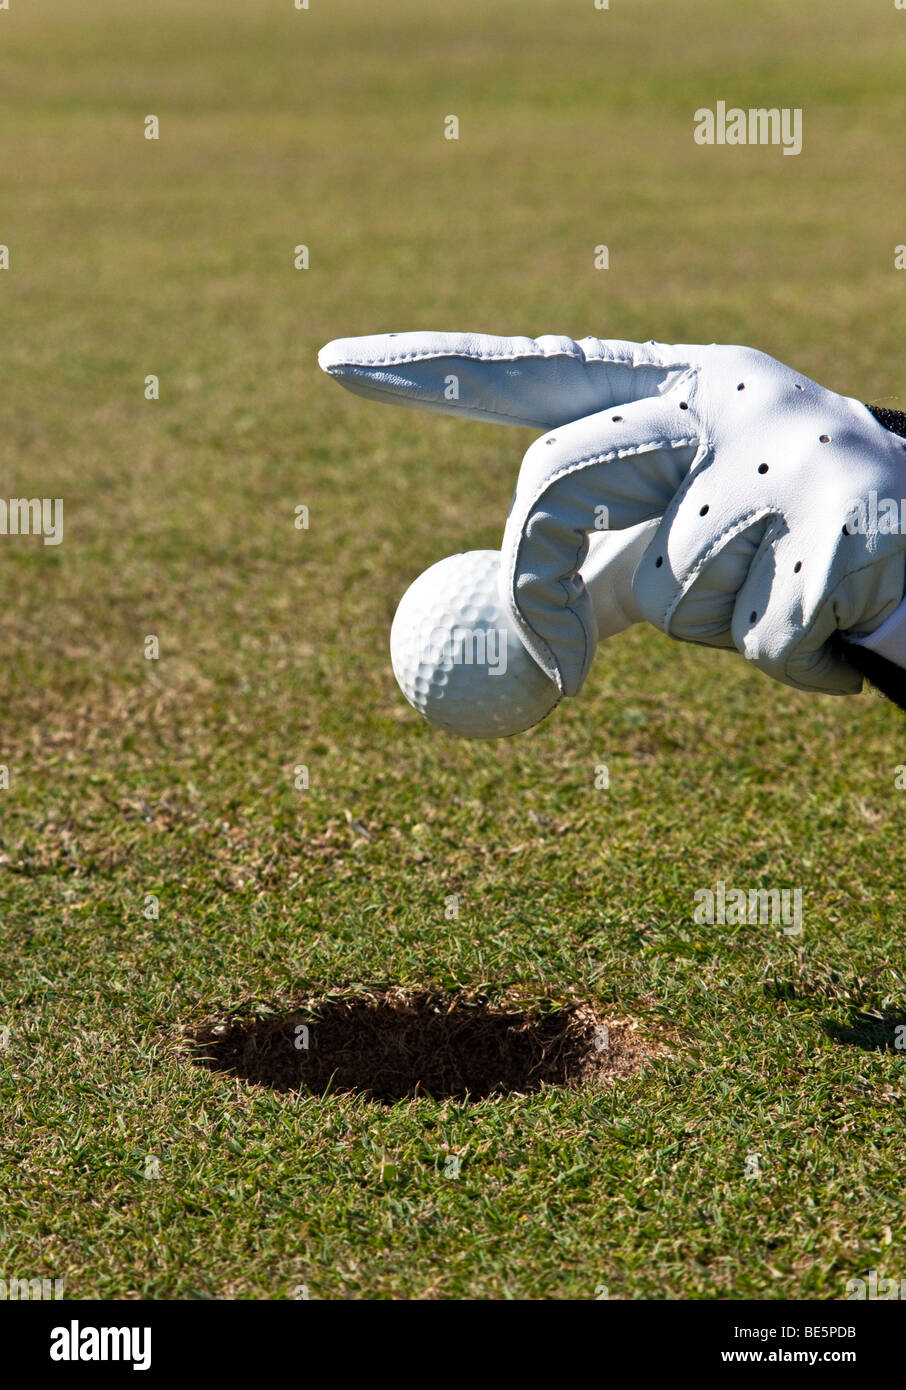 Putting without golf clubs, hand holding a golf ball Stock Photo